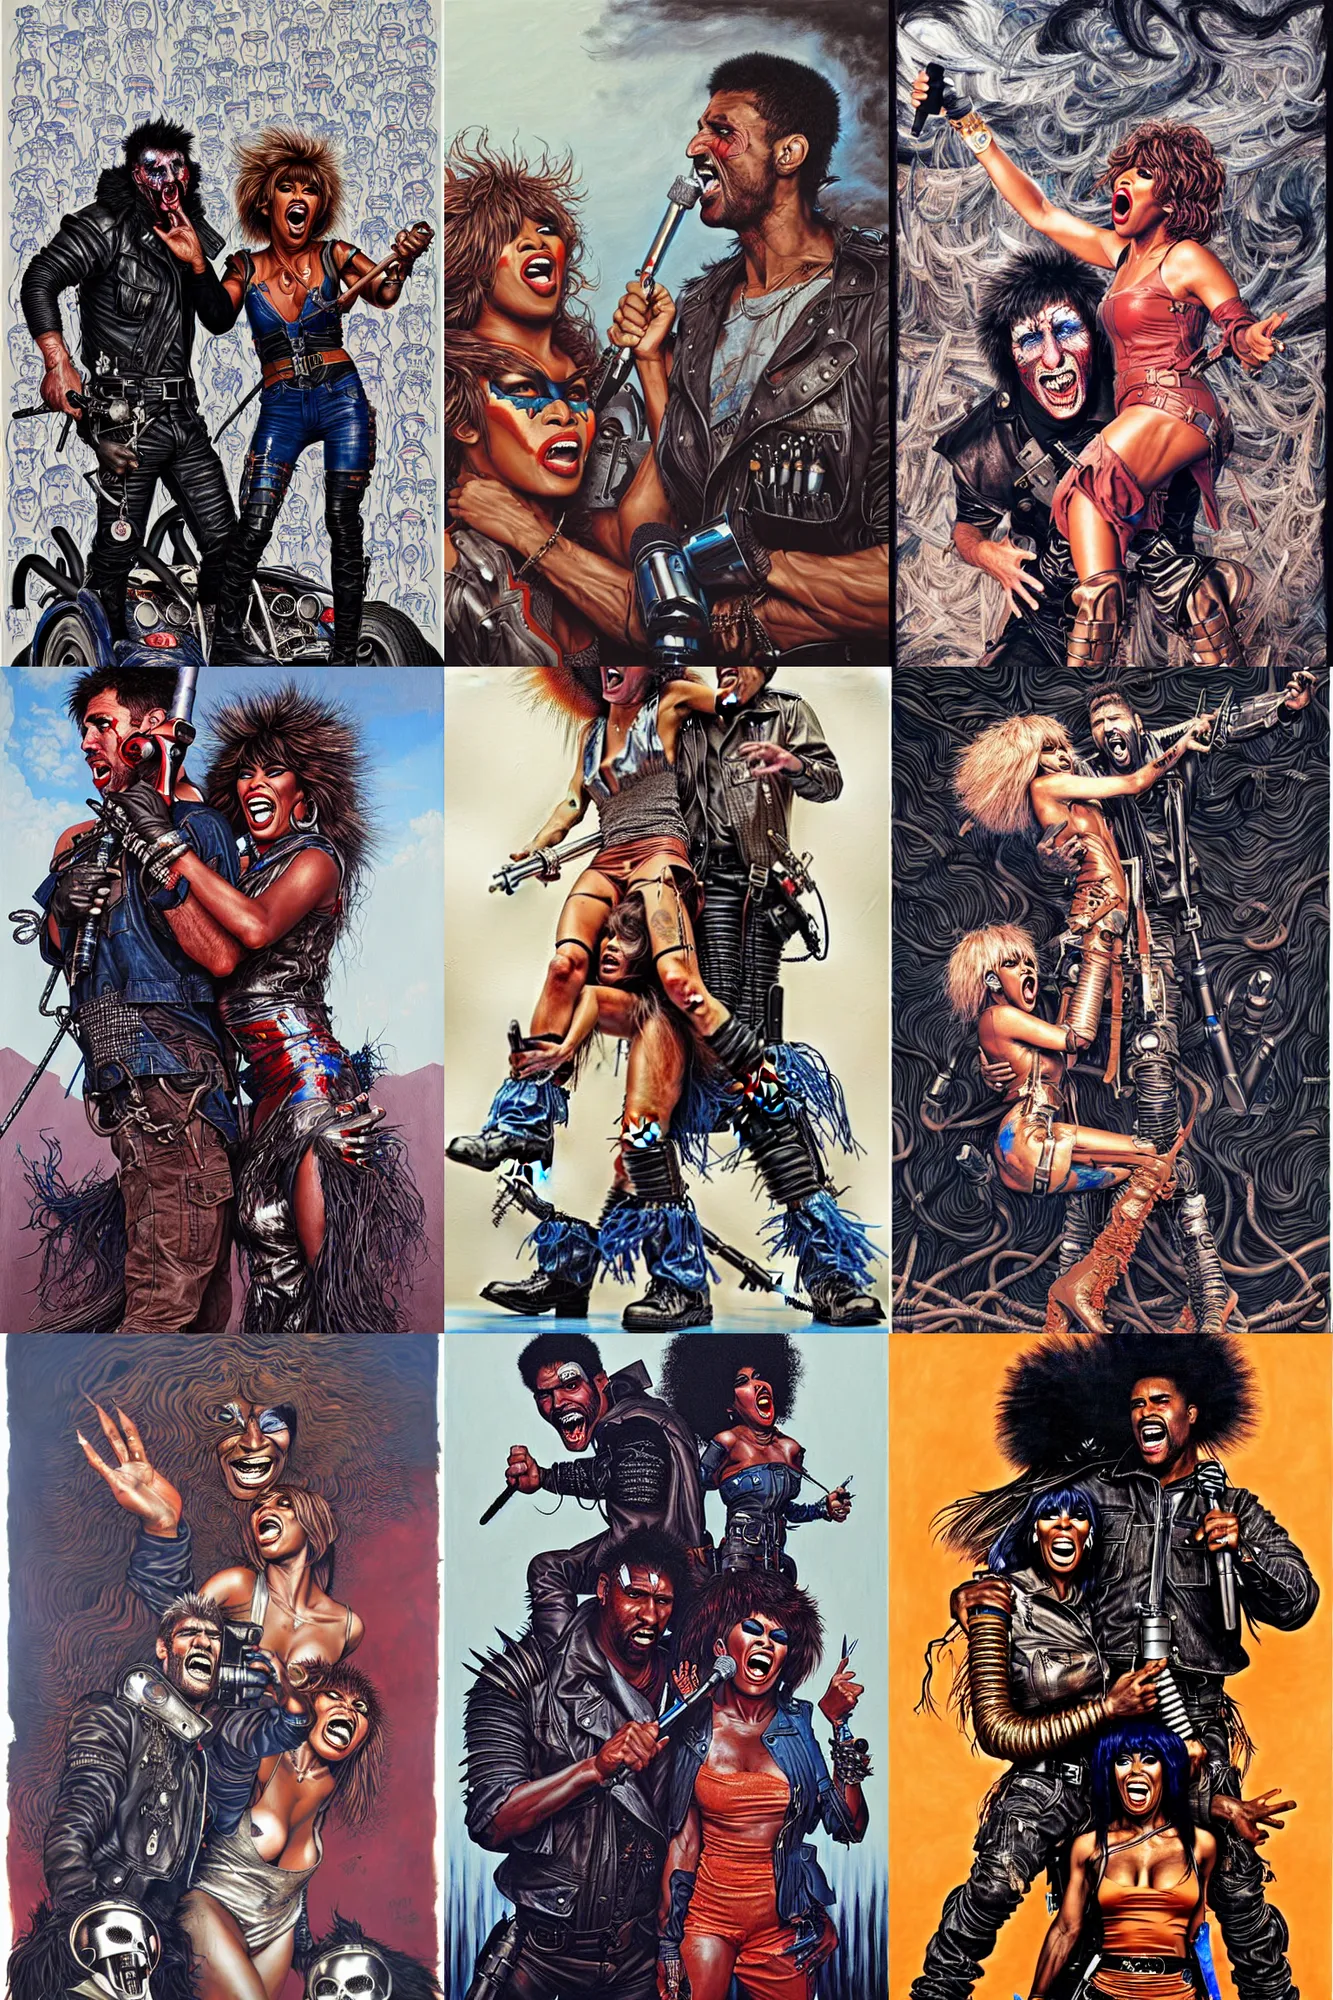 Prompt: mad max and tina turner singing we don't need another hero, painting by james jean, very detailed and vivid, both having a lot of fun, very thunderdome